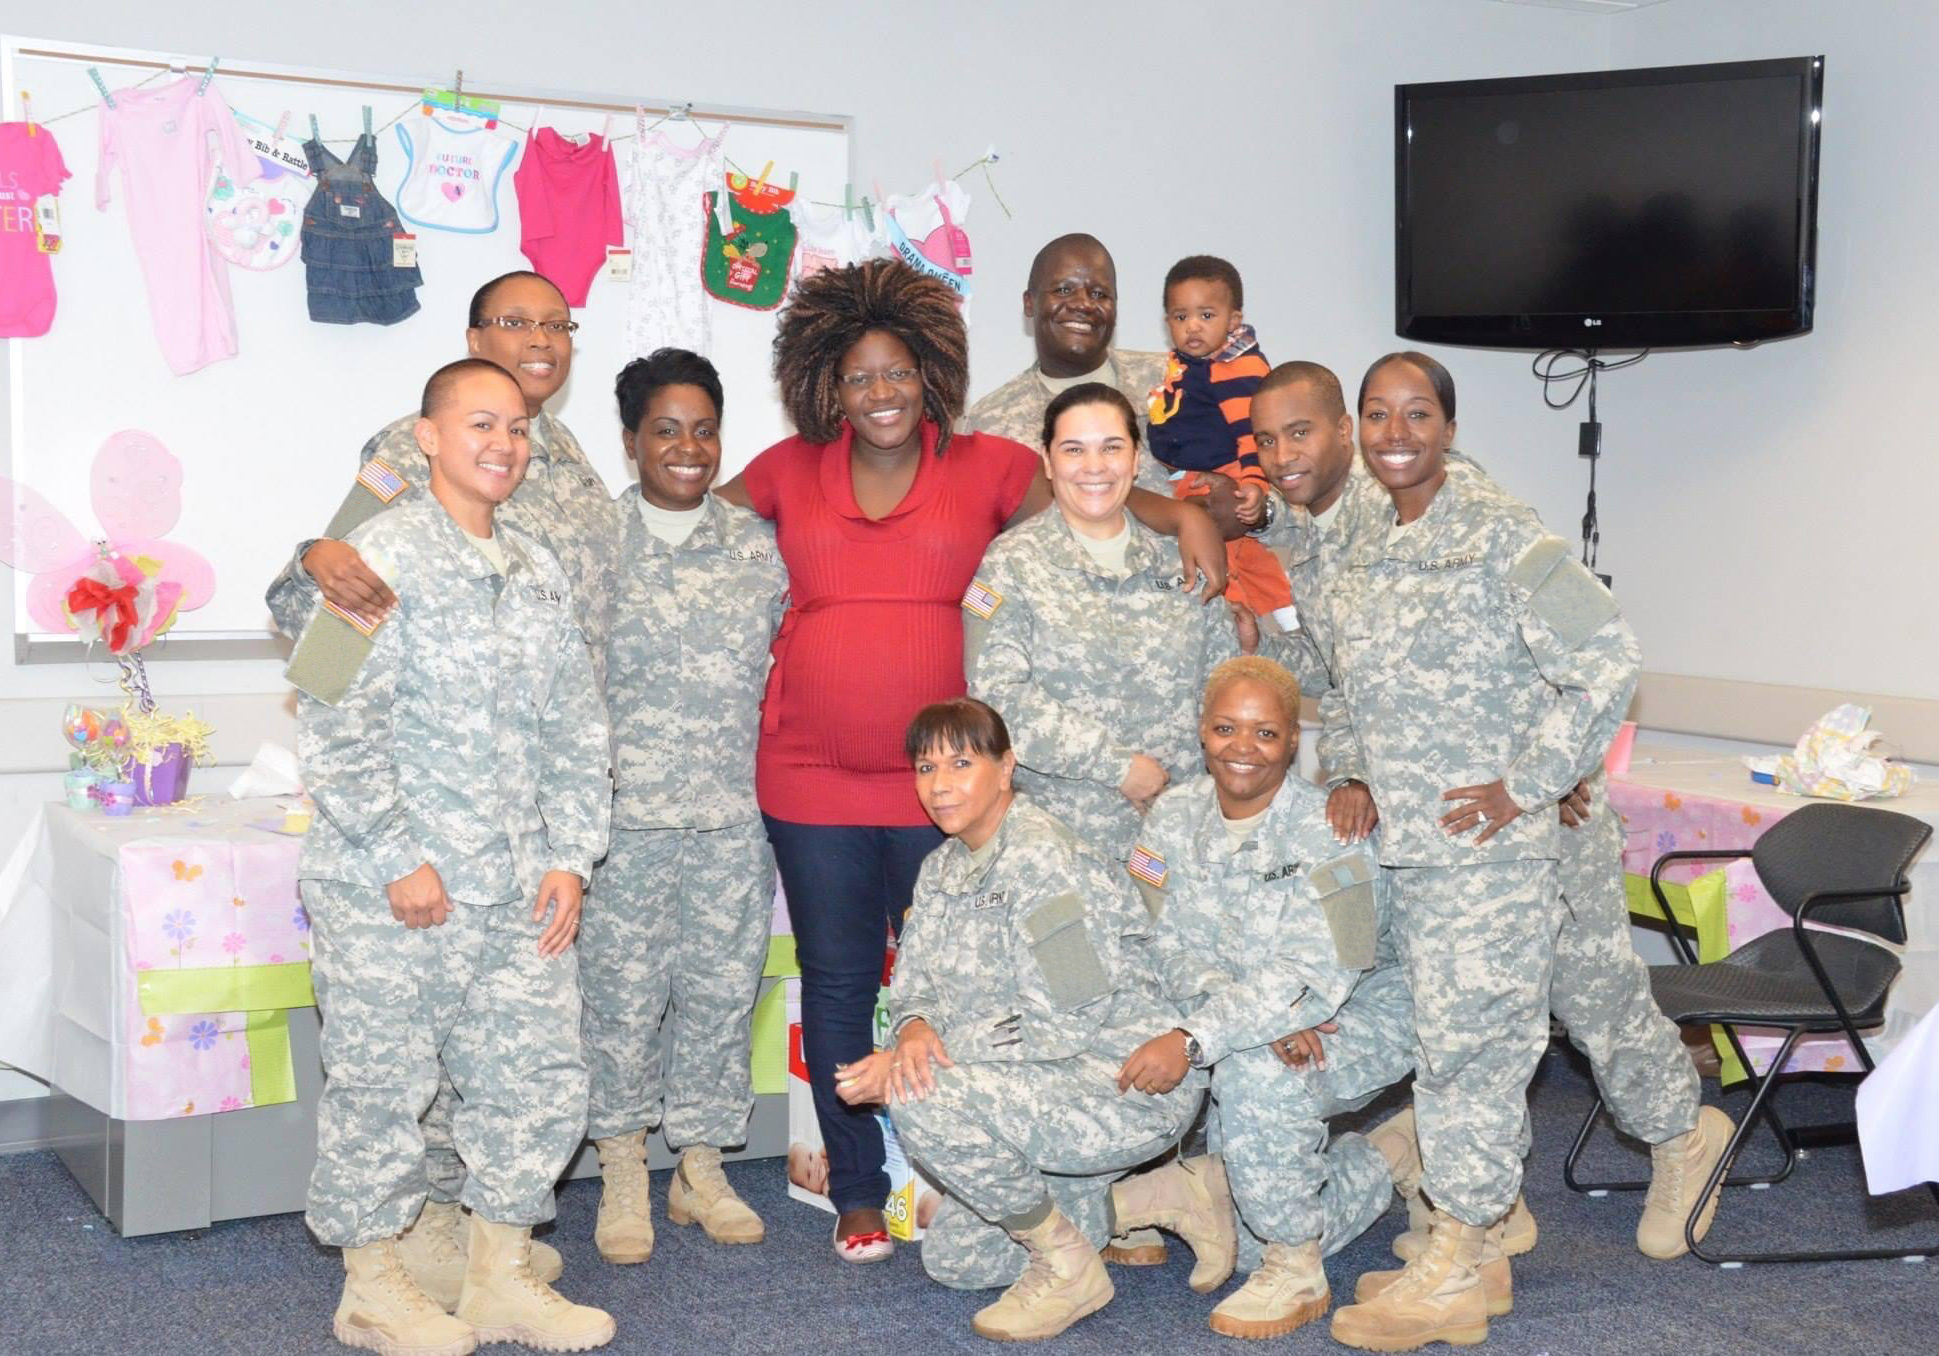 An expecting Lydiah poses in the middle, standing alongside her husband, son, and eight other soldiers at her baby shower.